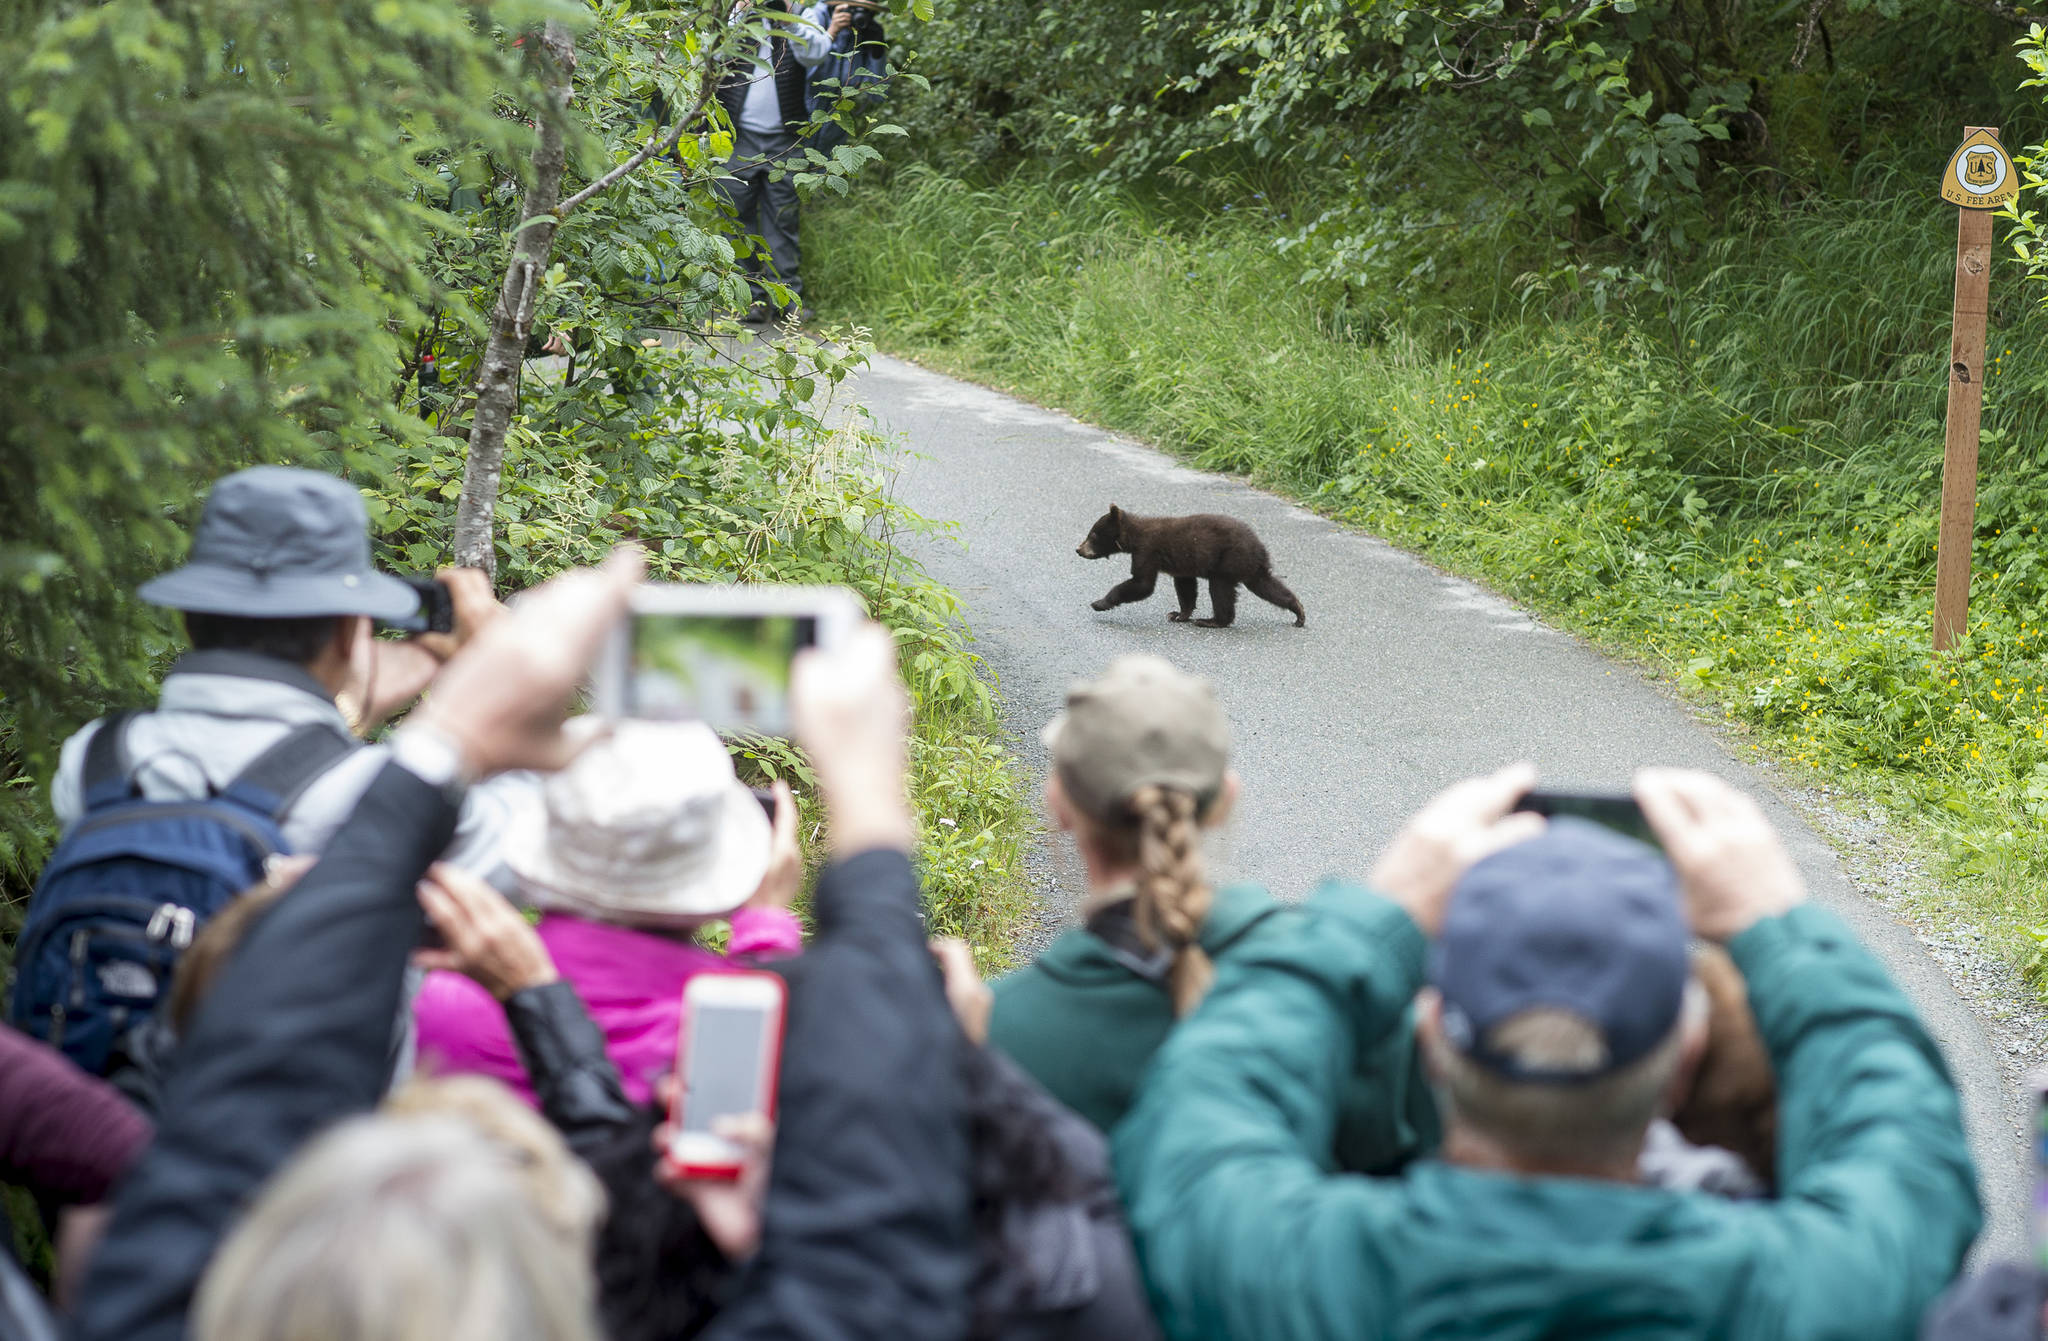 Tourists watch as one of two cubs crosses the path between groups of tourists visiting the Mendenhall Glacier Visitor Center in 2018. (Michael Penn | Juneau Empire file)